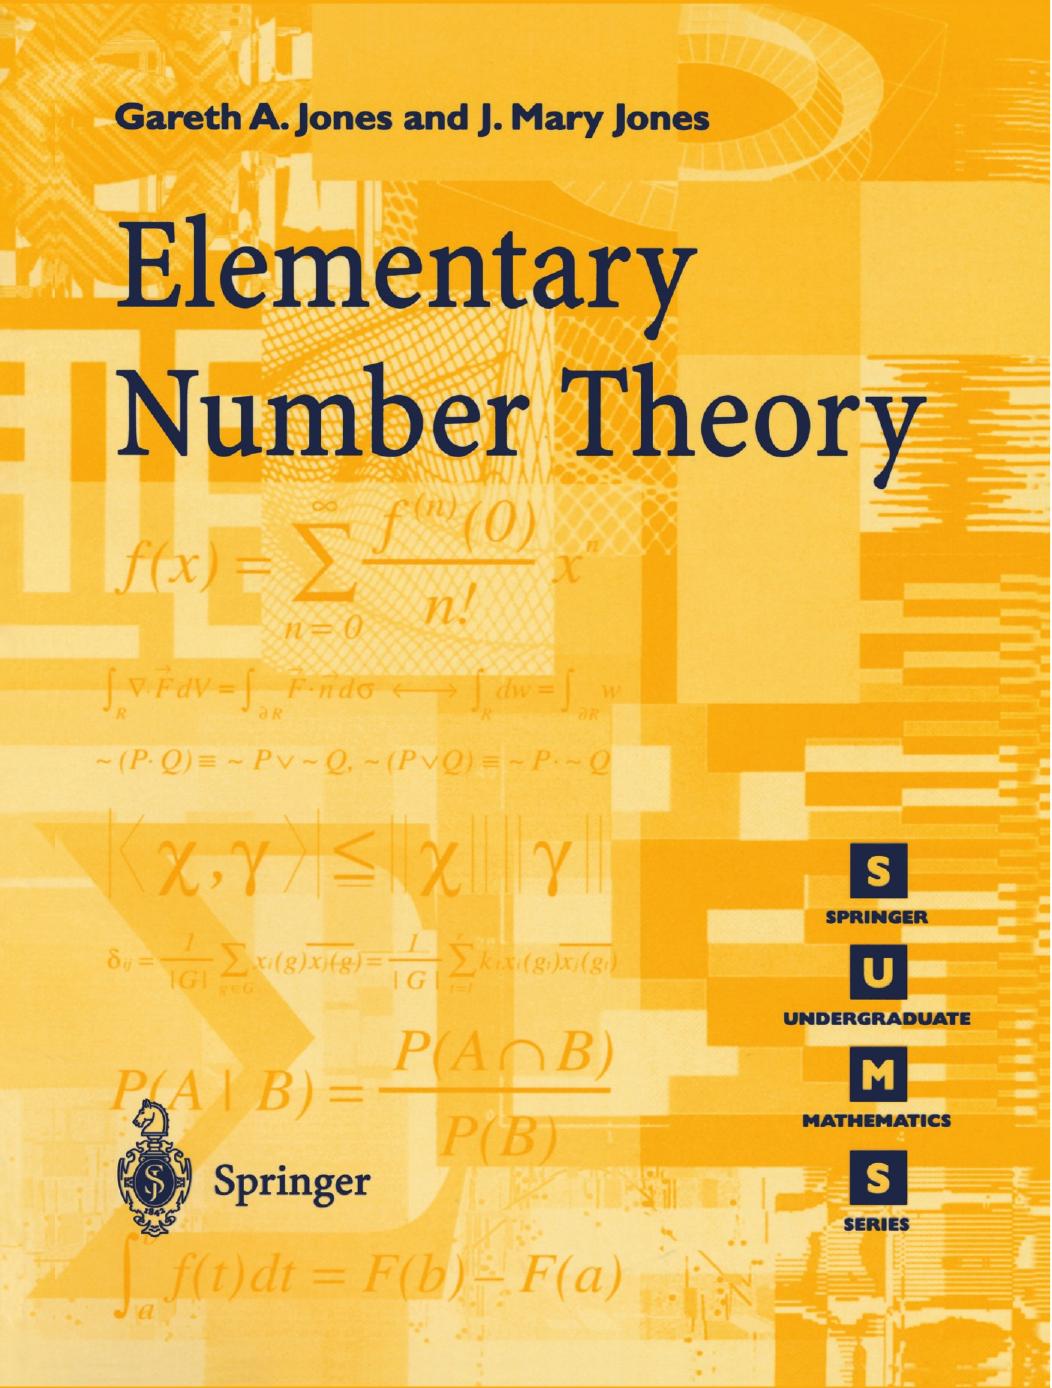 Elementary Number Theory 2015